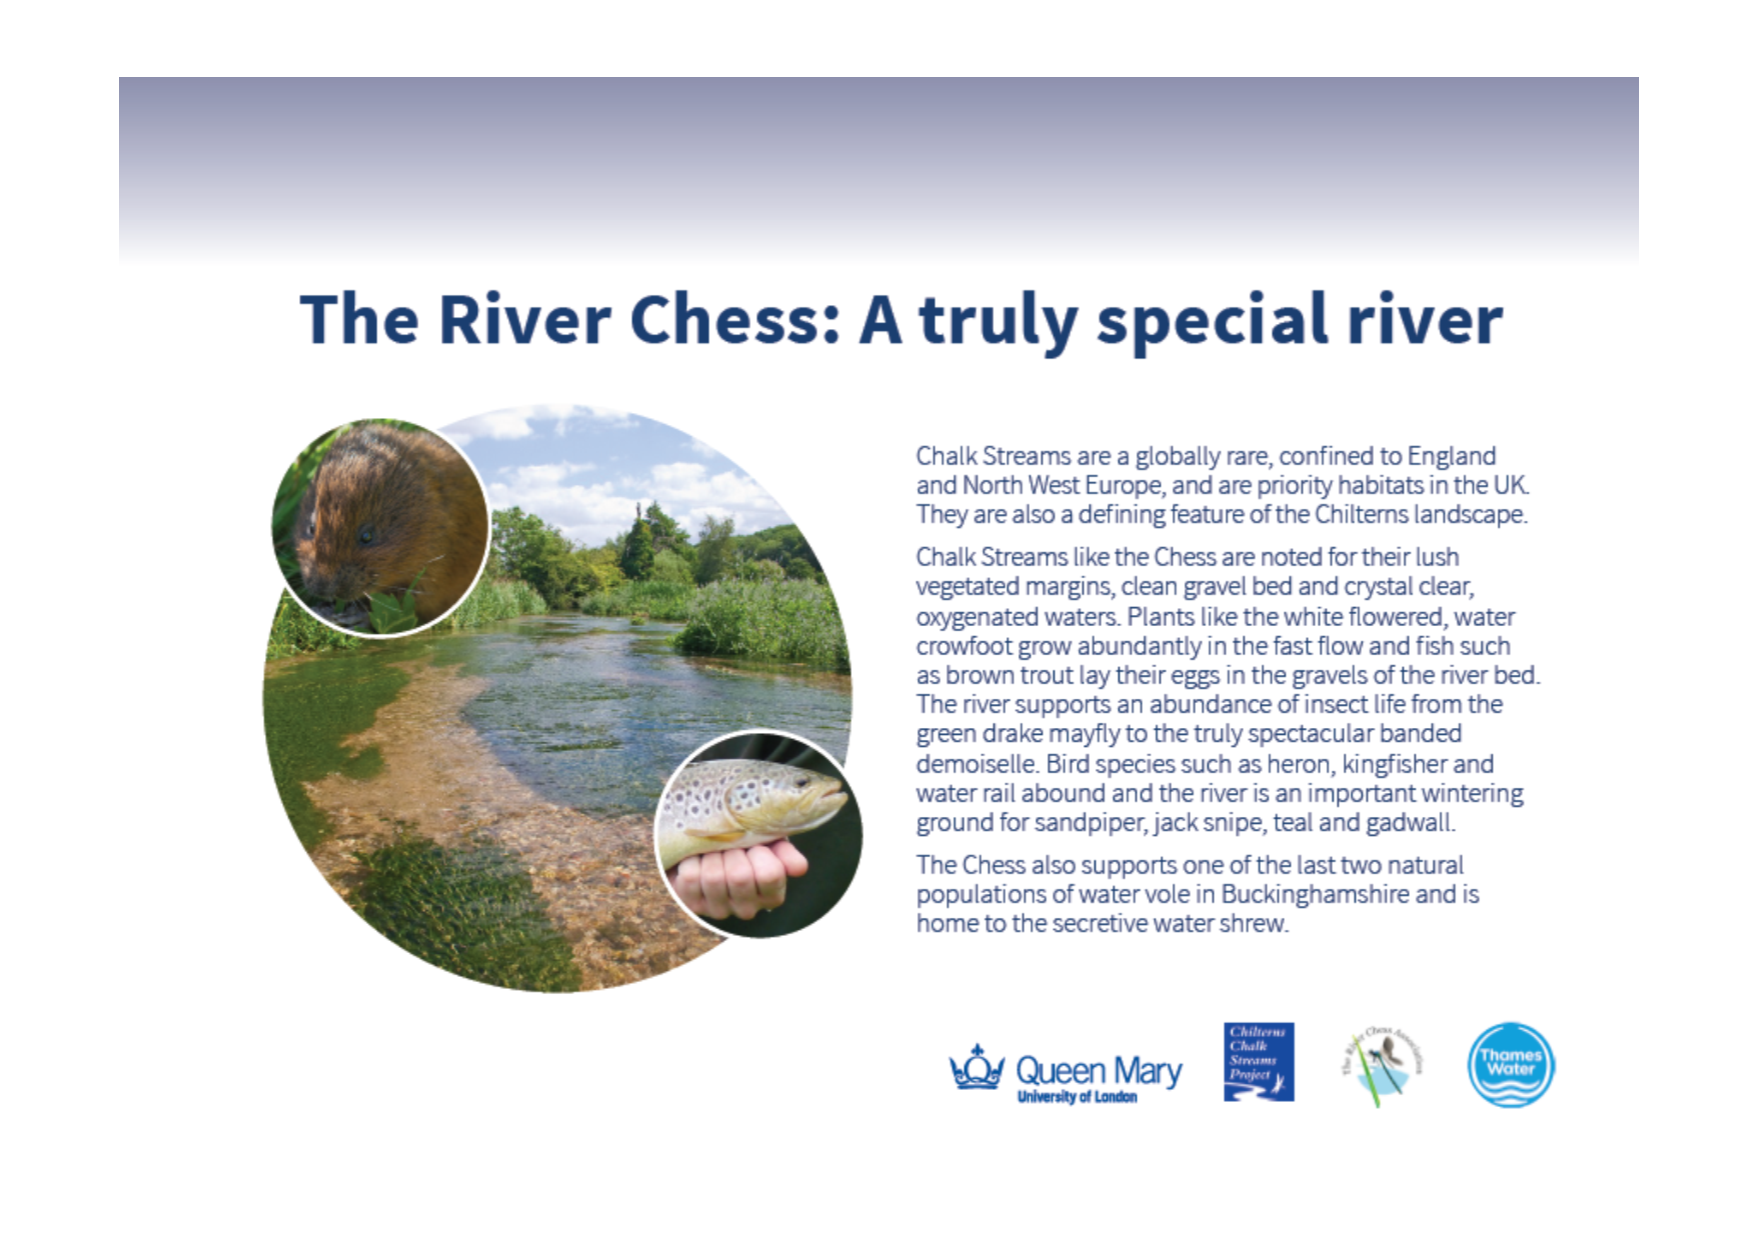 Thumbnail of our poster explaining why the River Chess is such a special river.